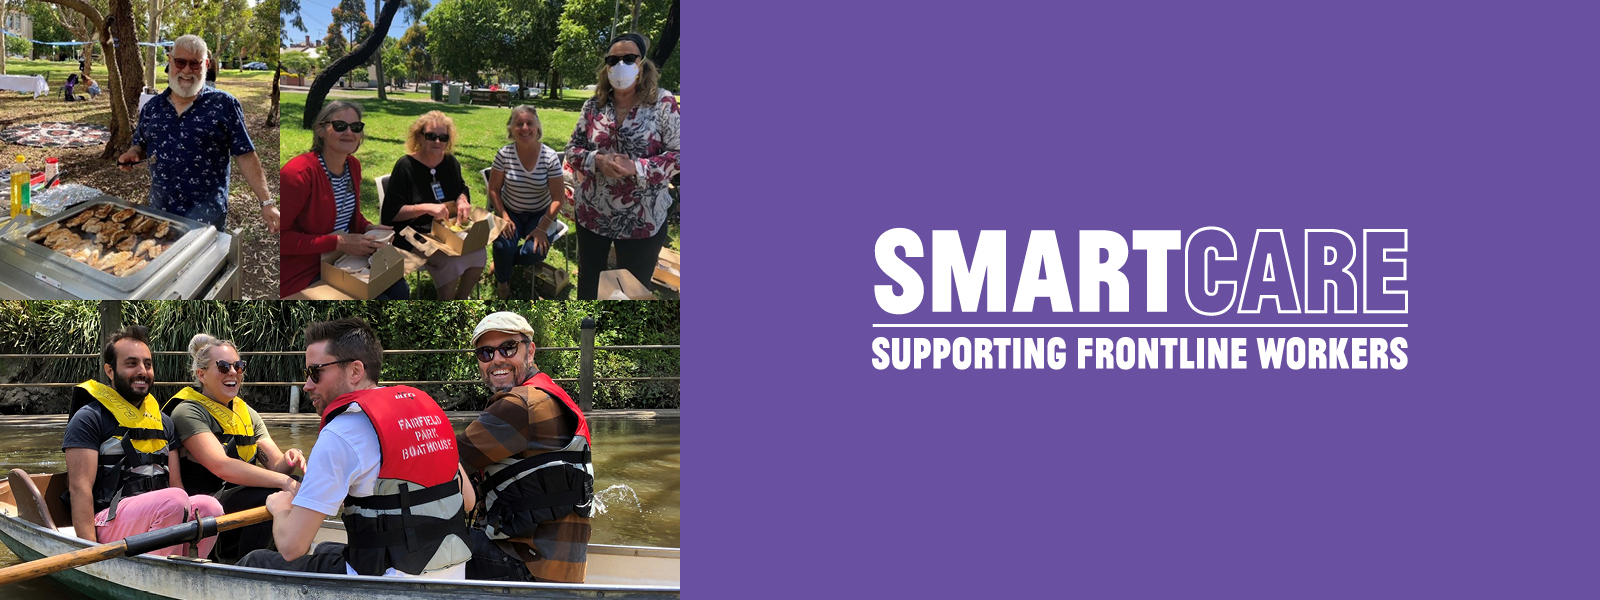 SmartCare supporting frontline workers